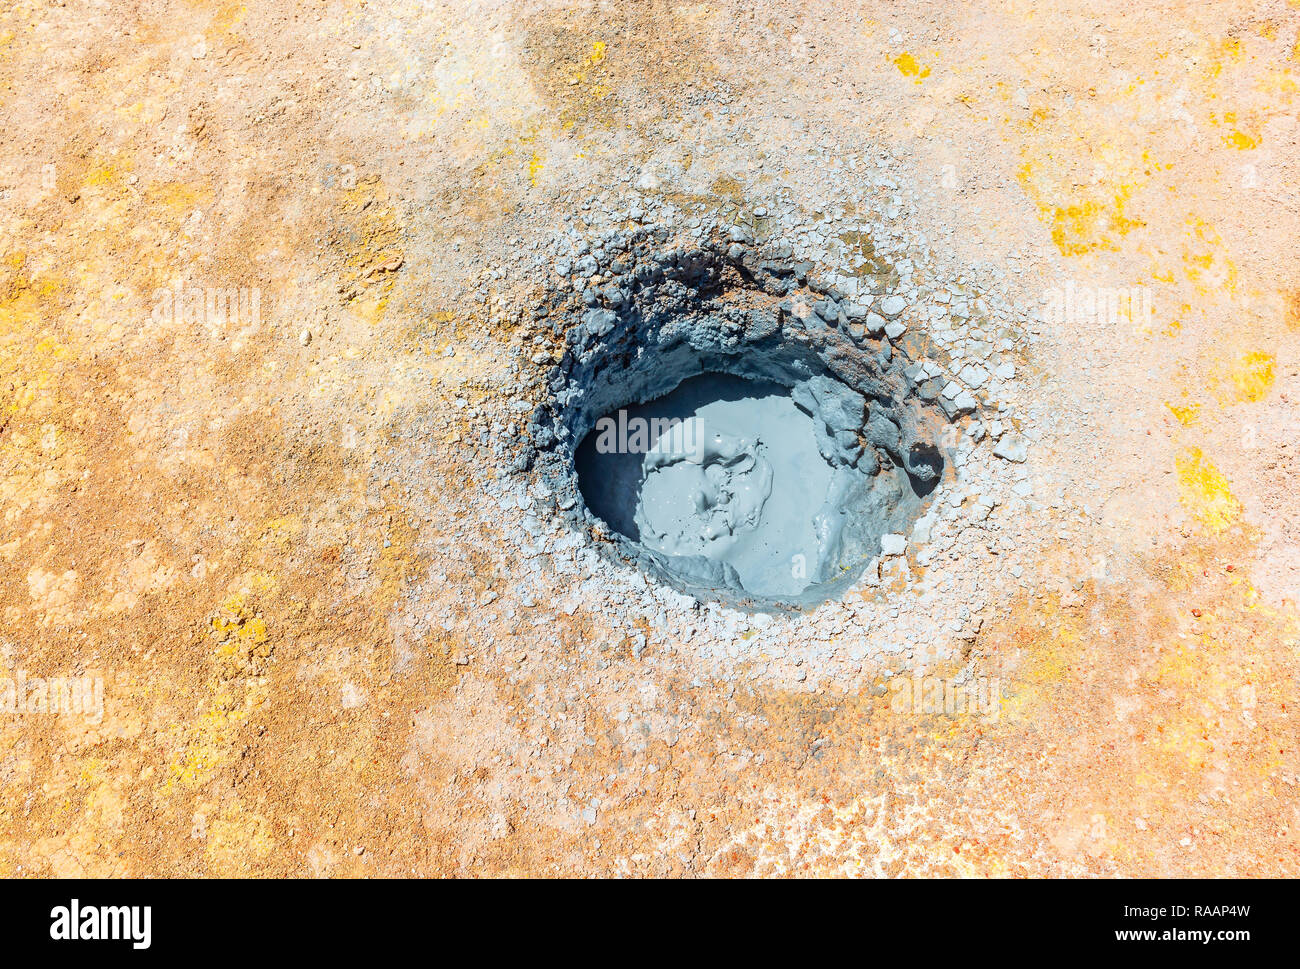 A mud pit in the volcanic active hot spot of Sol de Mañana in the altiplano of Bolivia located between the Uyuni salt flat and the Atacama desert. Stock Photo